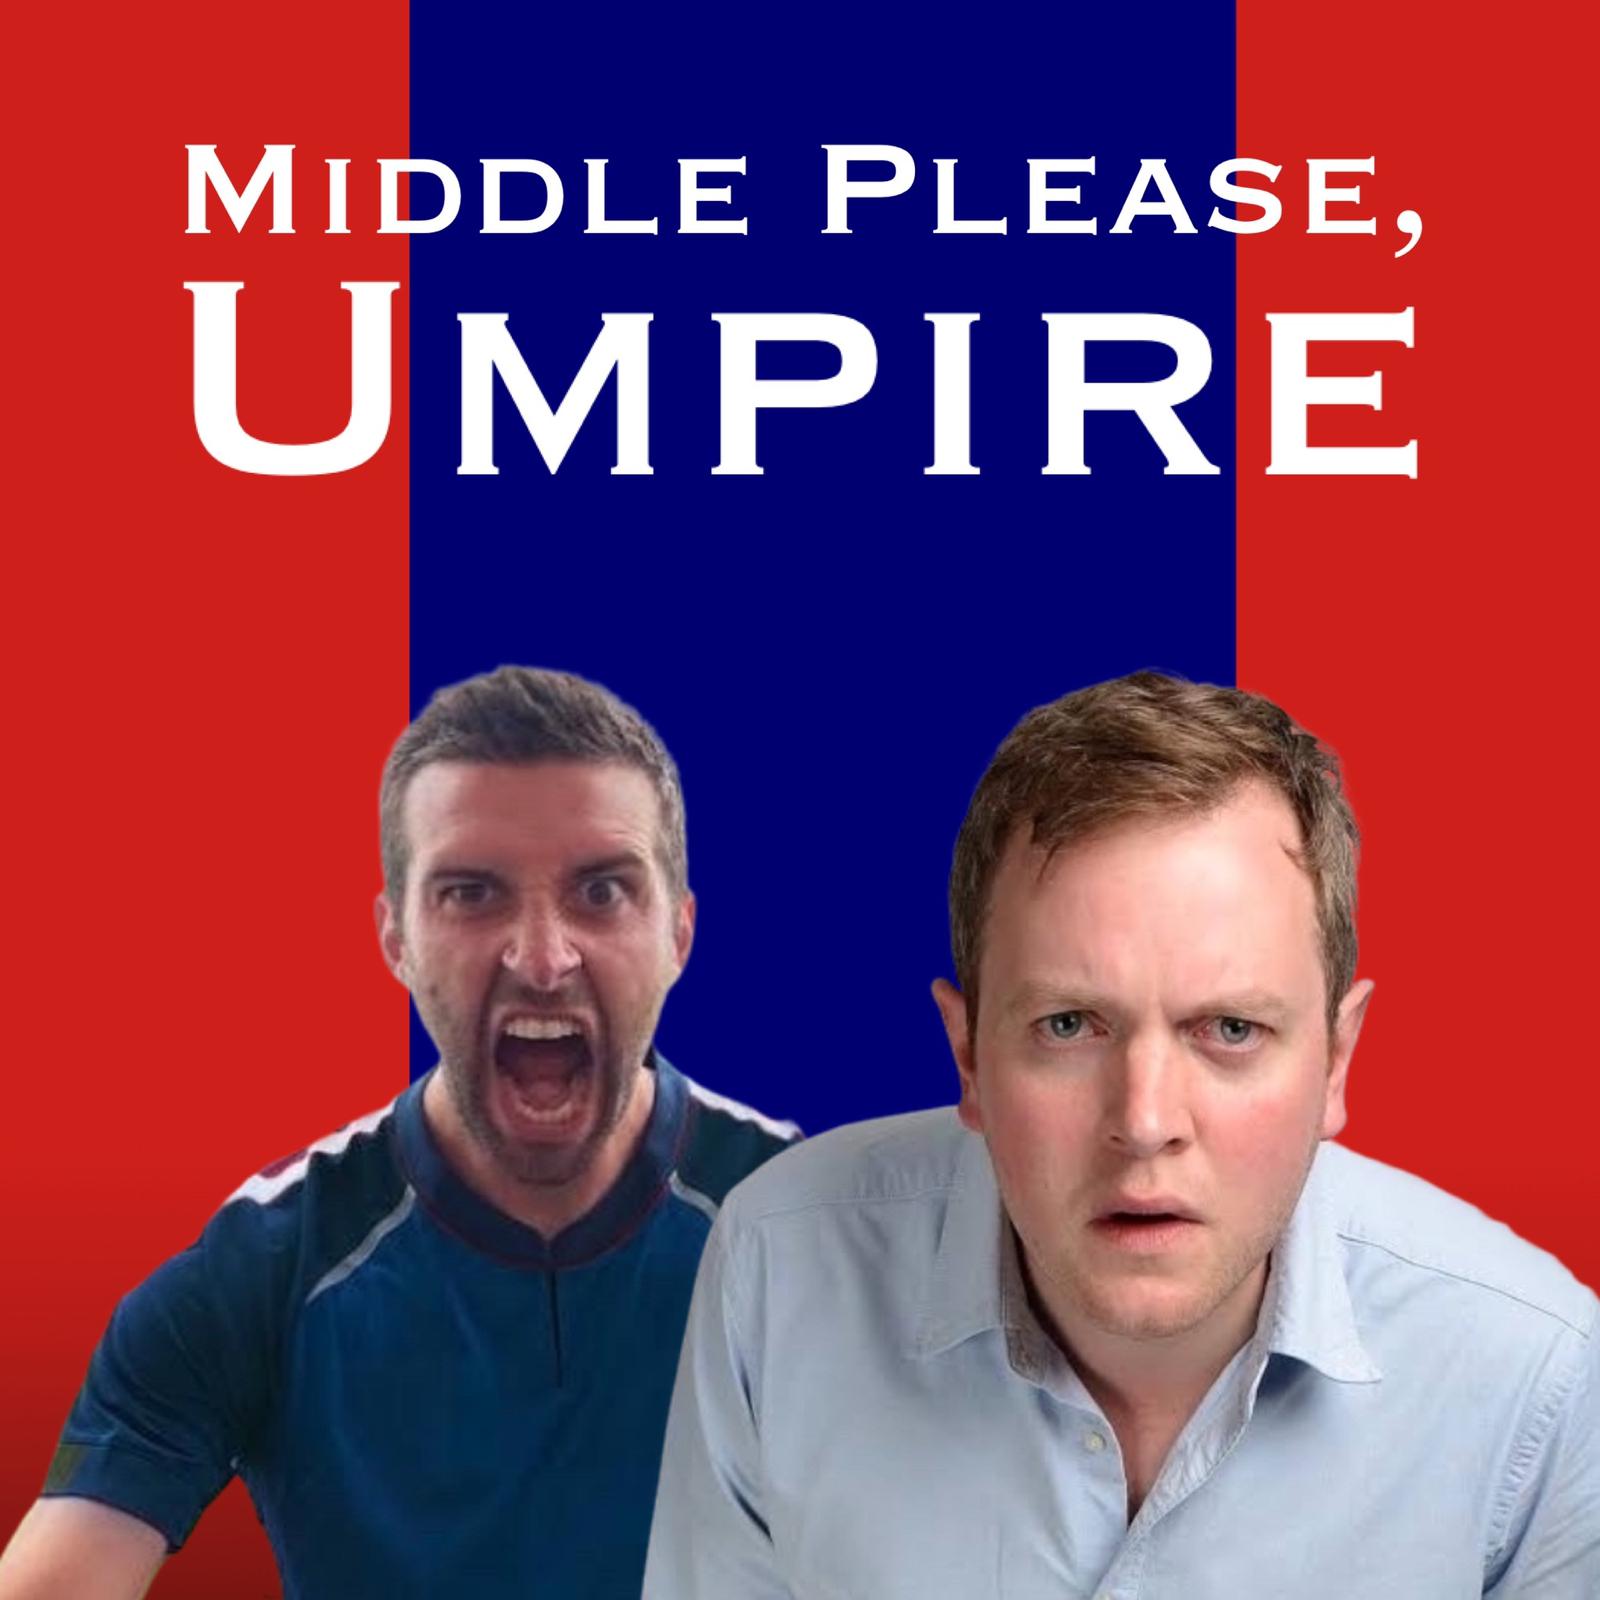 Middle Please, Umpire image